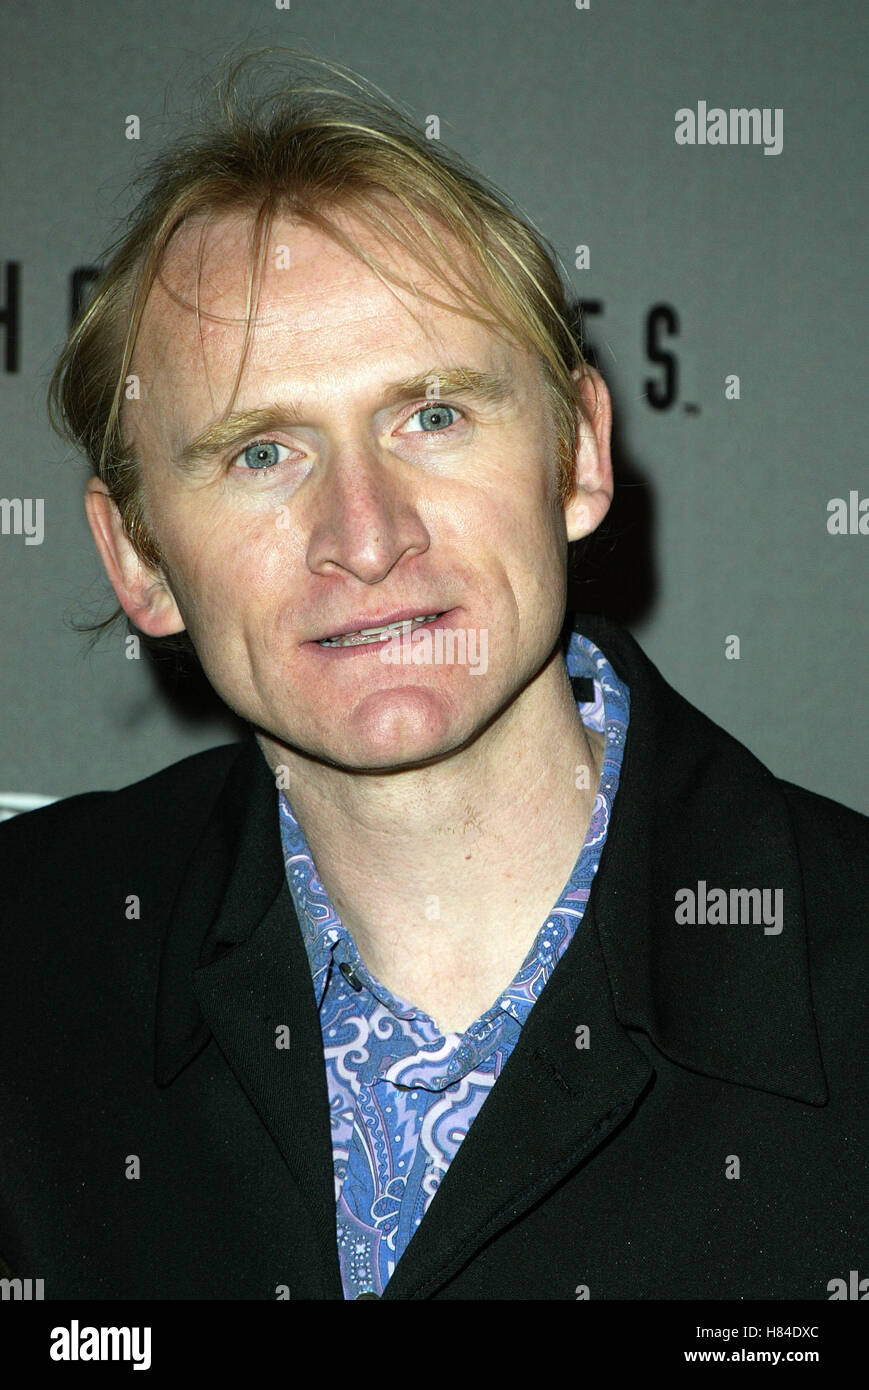 DEAN HAGLUND X-FILES FINALE WARP PARTY HOUSE OF BLUES HOLLYWOOD LOS ANGELES USA 27 April 2002 Stock Photo